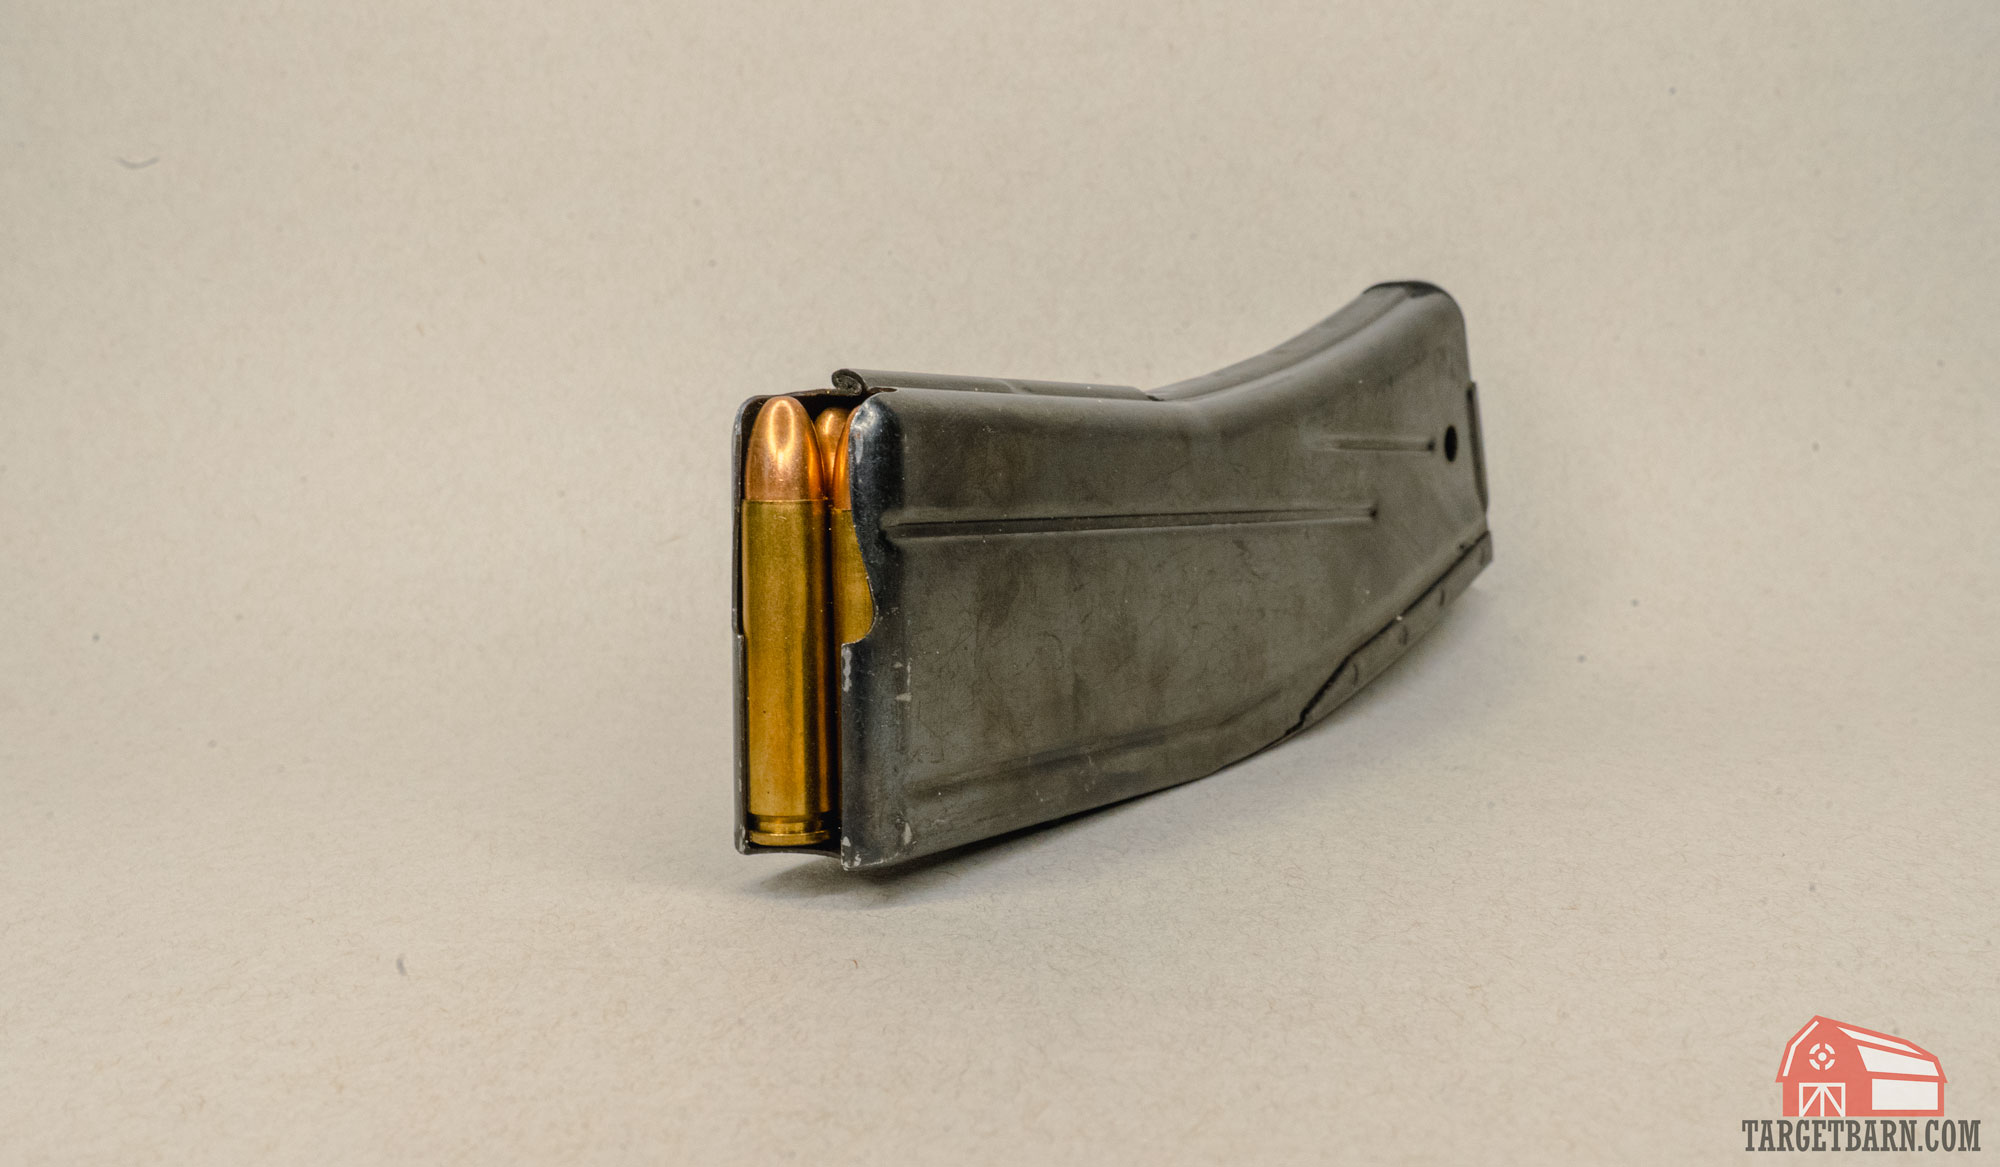 a 30 round magazine for the m1 carbine loaded with .30 carbine cartridges